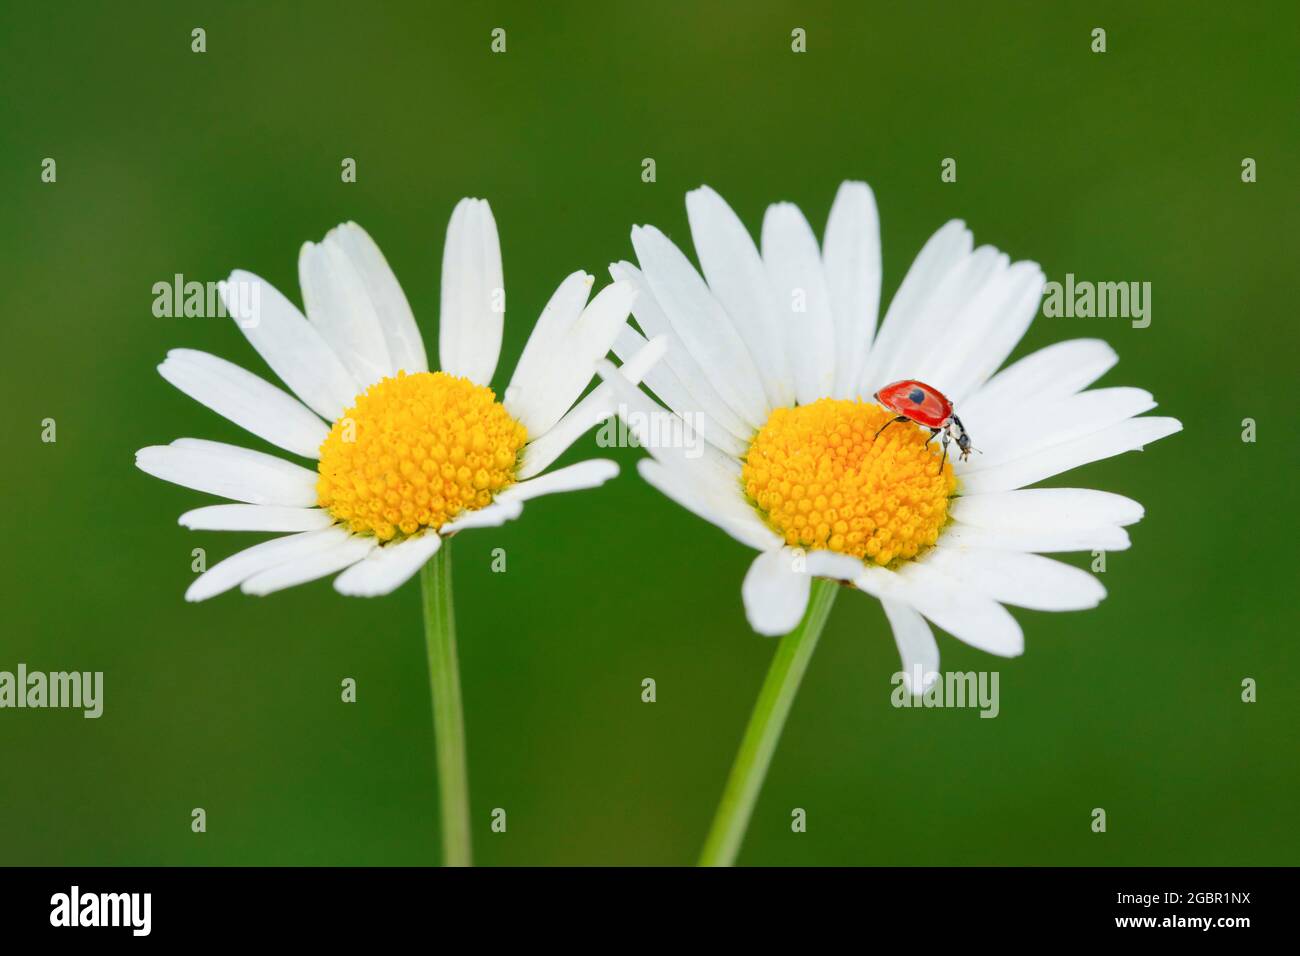 zoology, insects (Insecta), two-spot ladybird on marguerite, Switzerland, NO-EXCLUSIVE-USE FOR FOLDING-CARD-GREETING-CARD-POSTCARD-USE Stock Photo